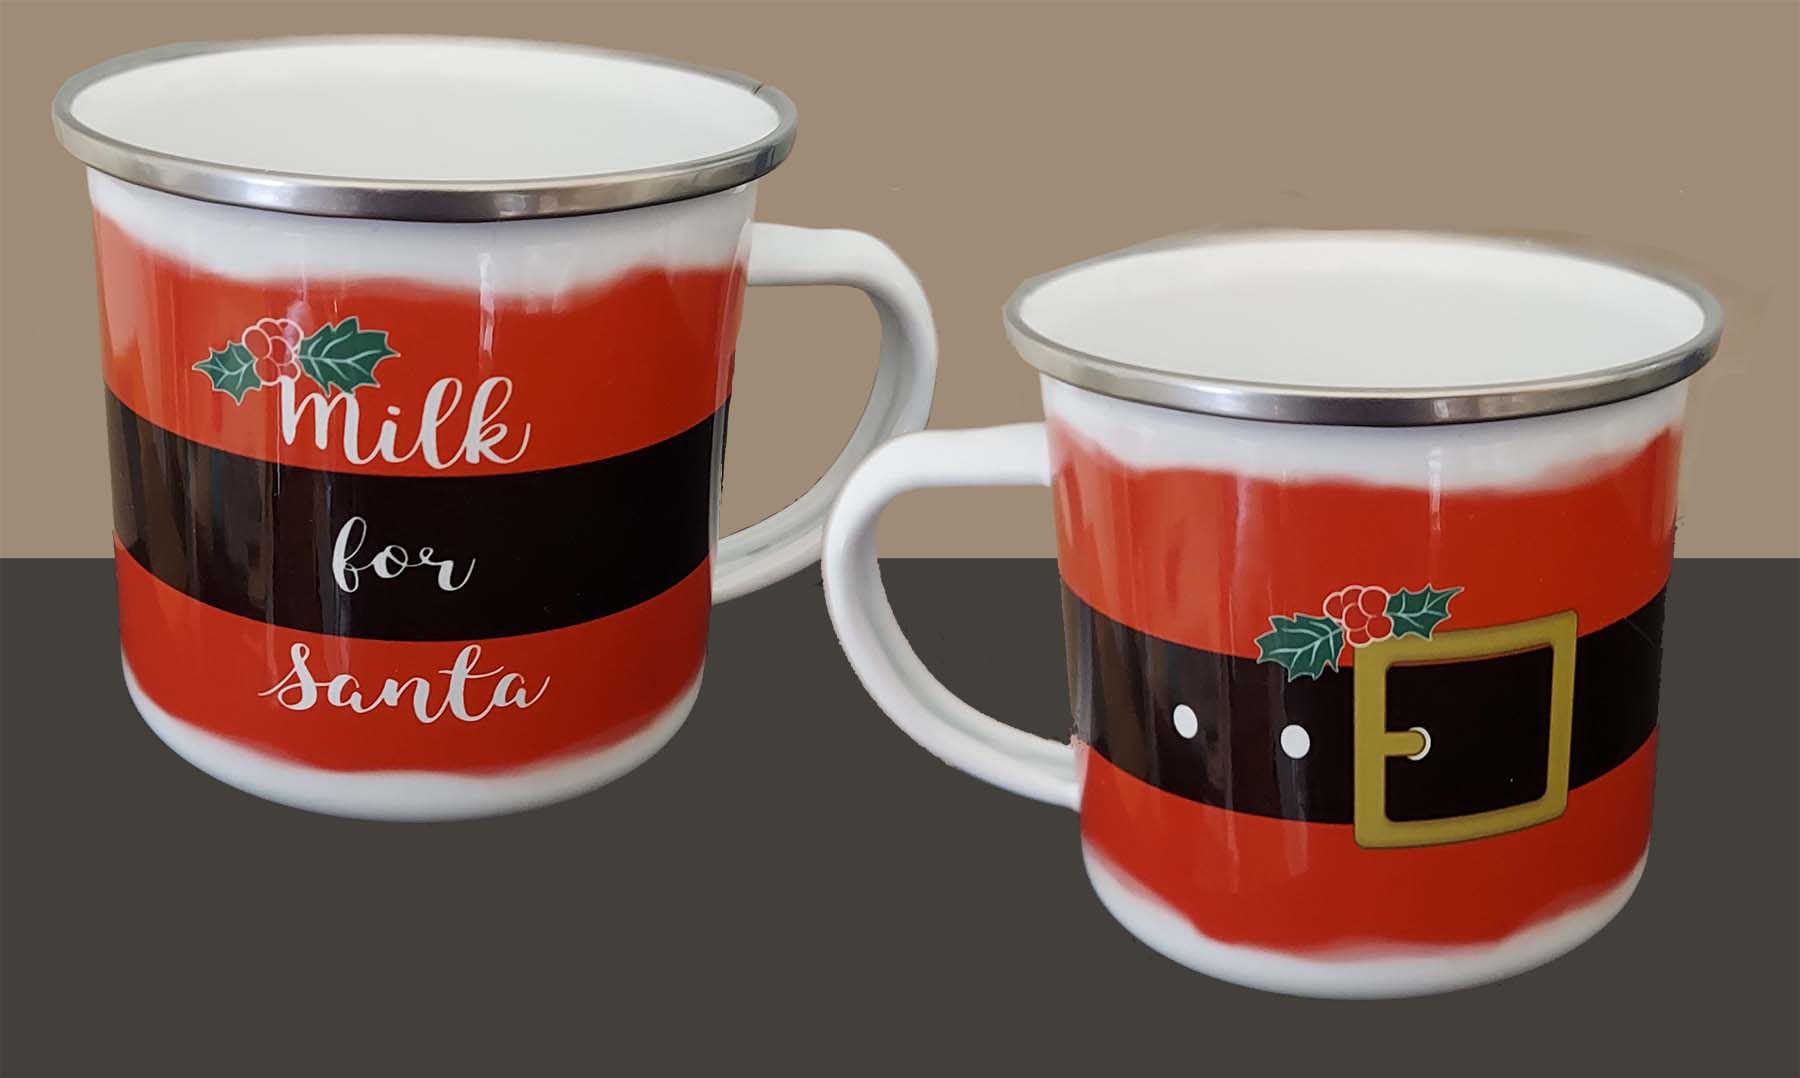 Santa's Milk cup made with sublimation printing